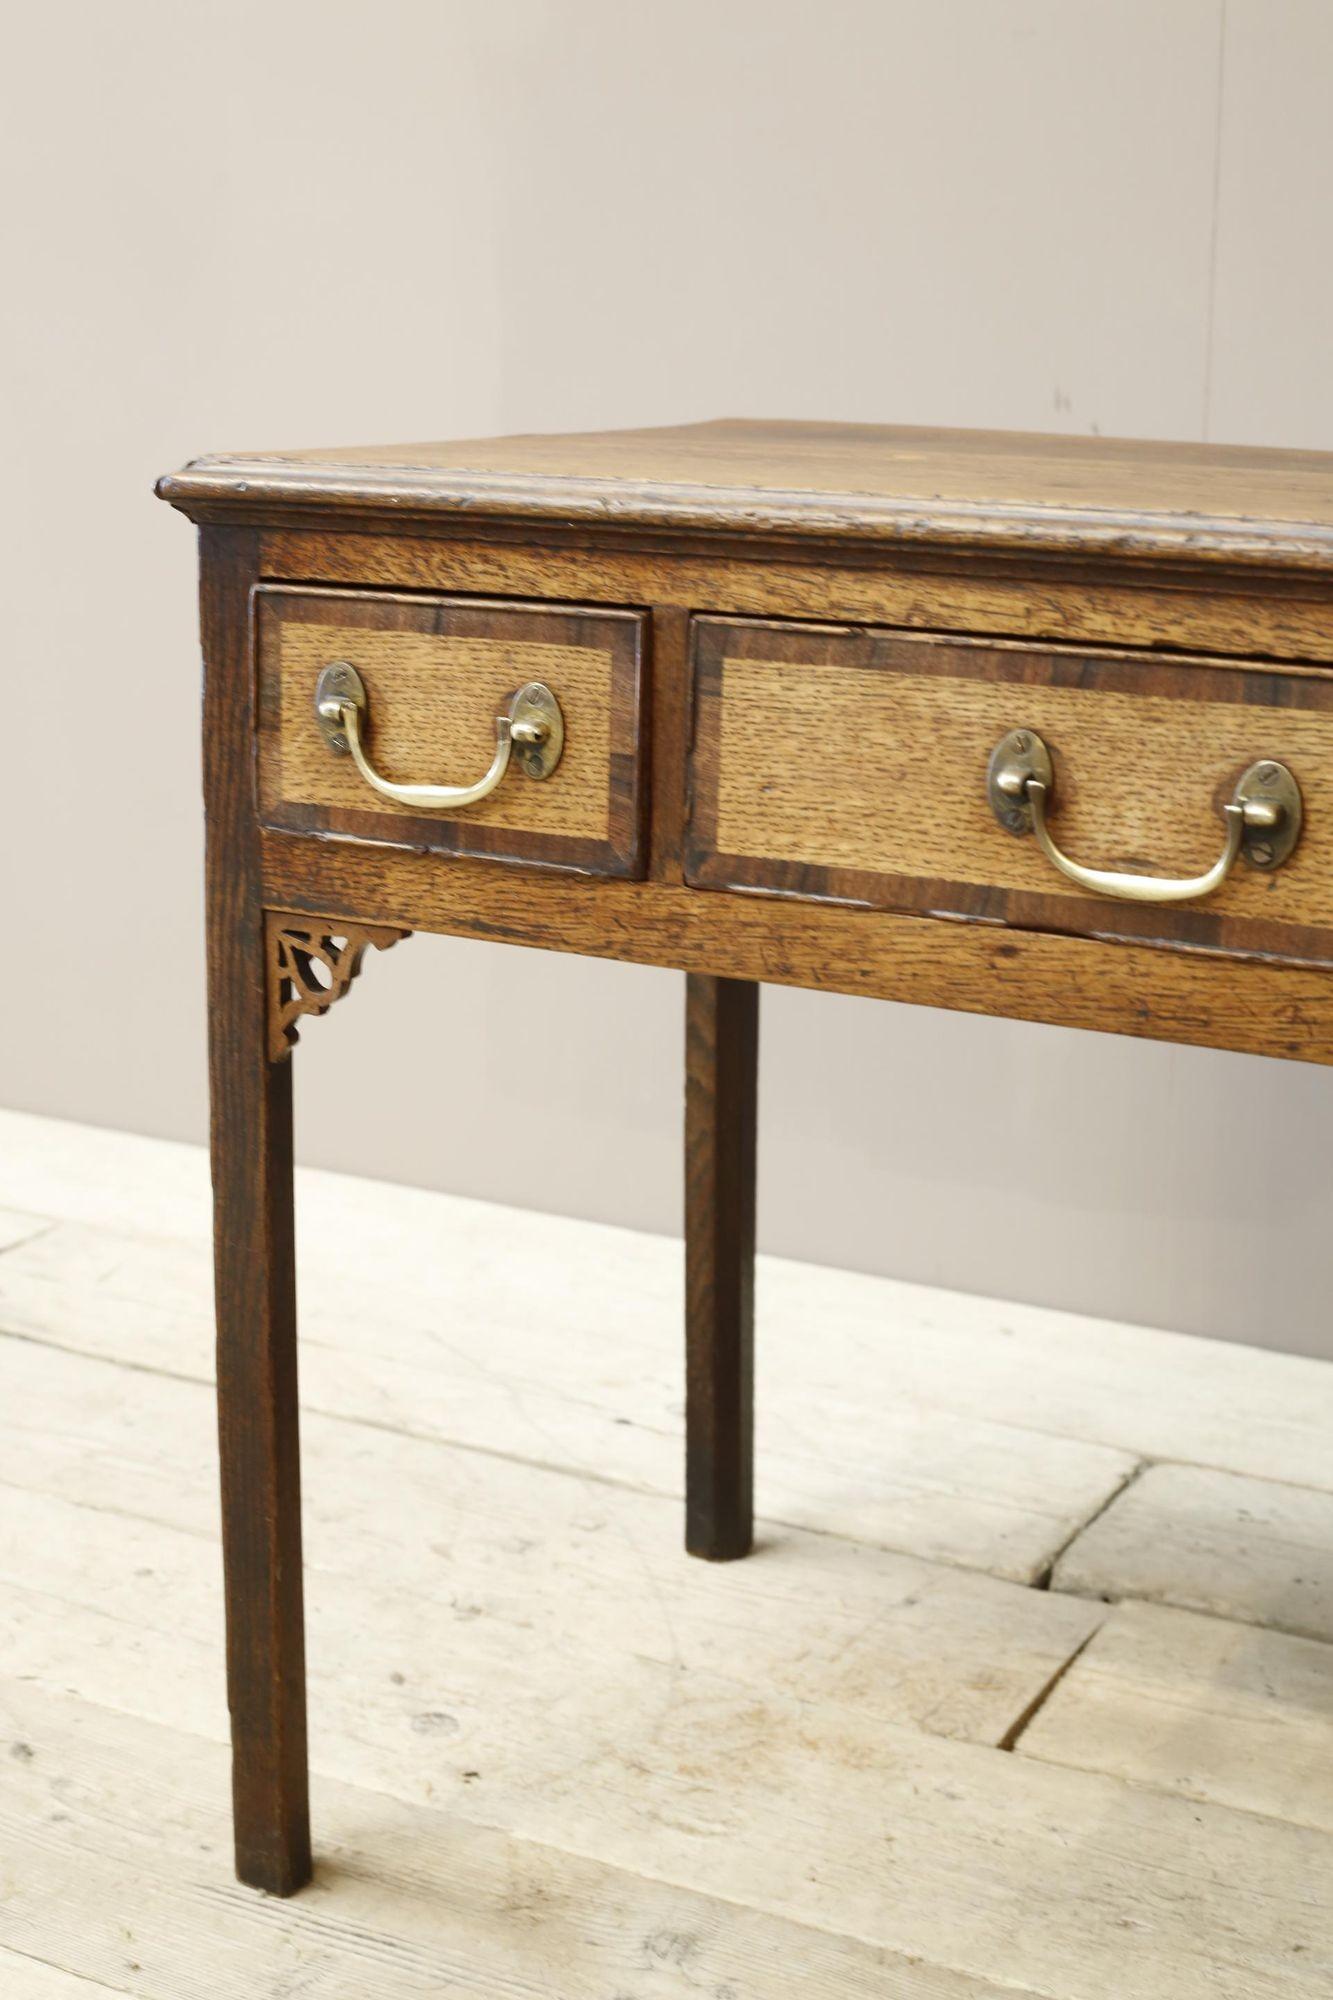 This is a great piece of honest 18th century Georgian furniture. Made from oak with attractive cross banded details around each drawer. Solid condition so perfectly useable and full of character. The drawers all open and shut easily. Nicely shaped